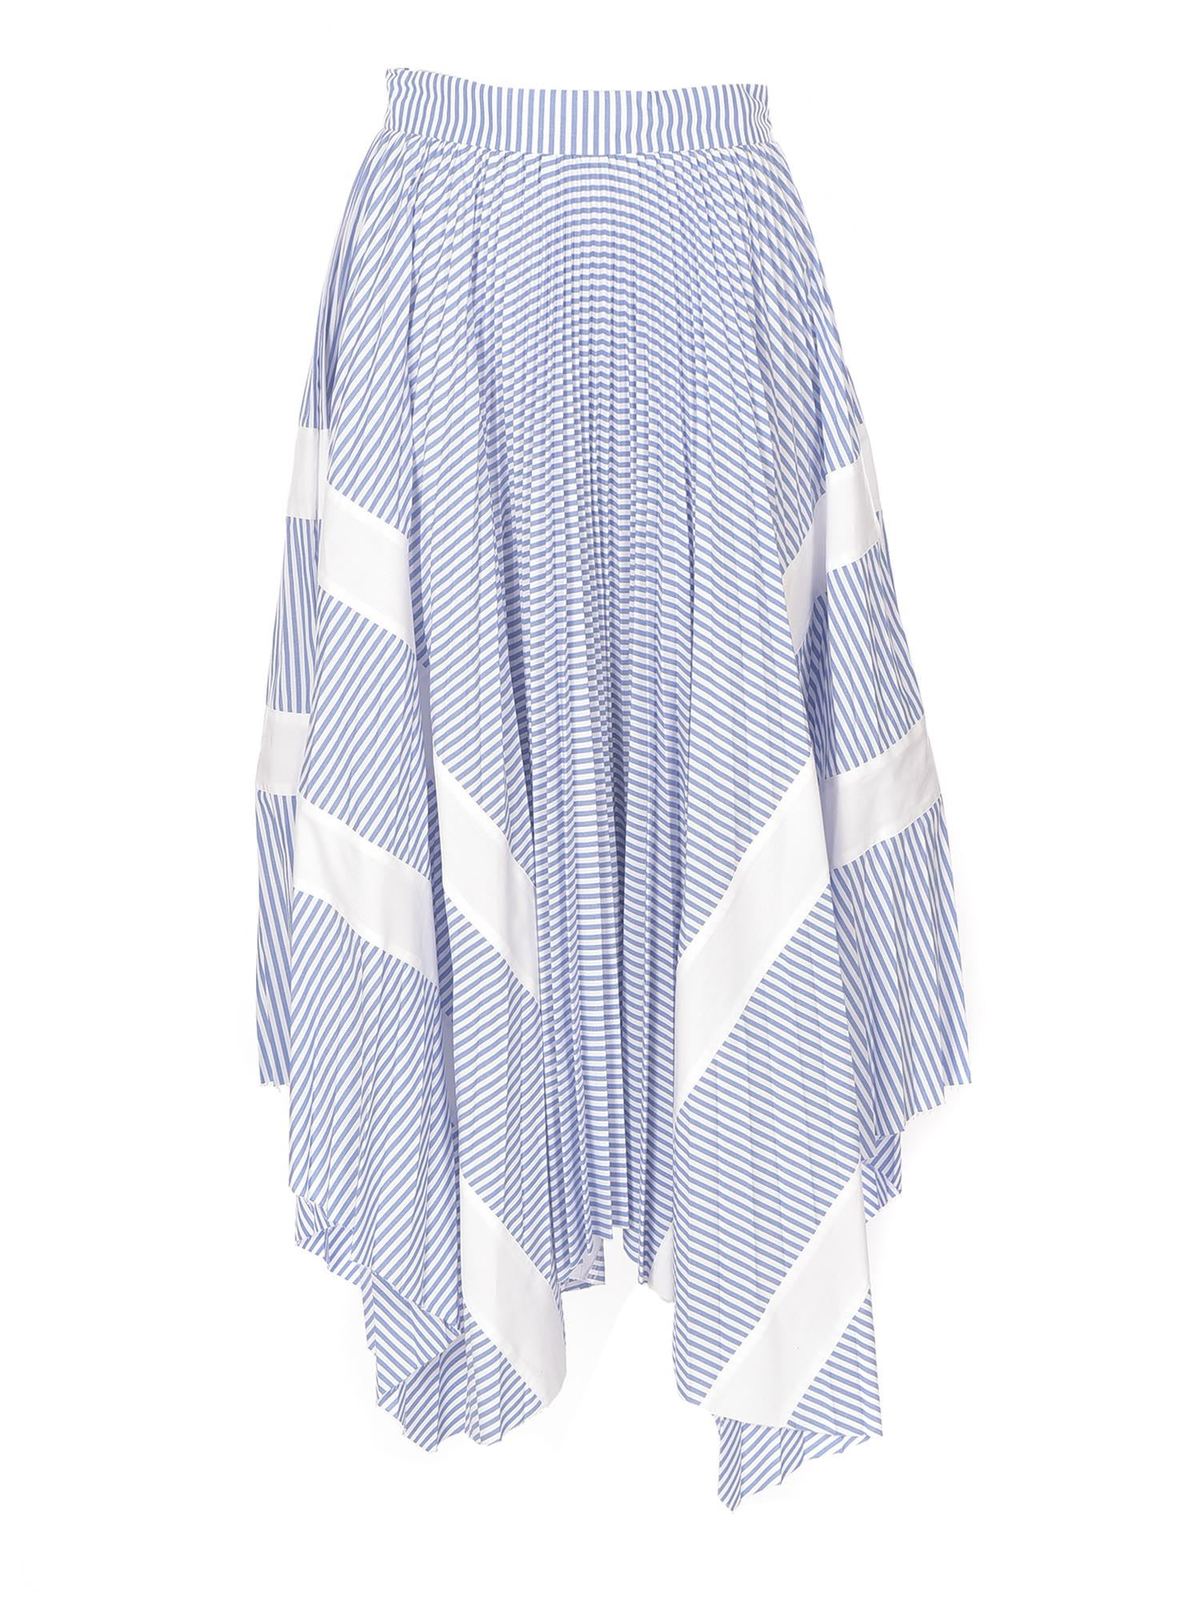 PALM ANGELS ASYMMETRICAL STRIPED SKIRT IN LIGHT BLUE AND